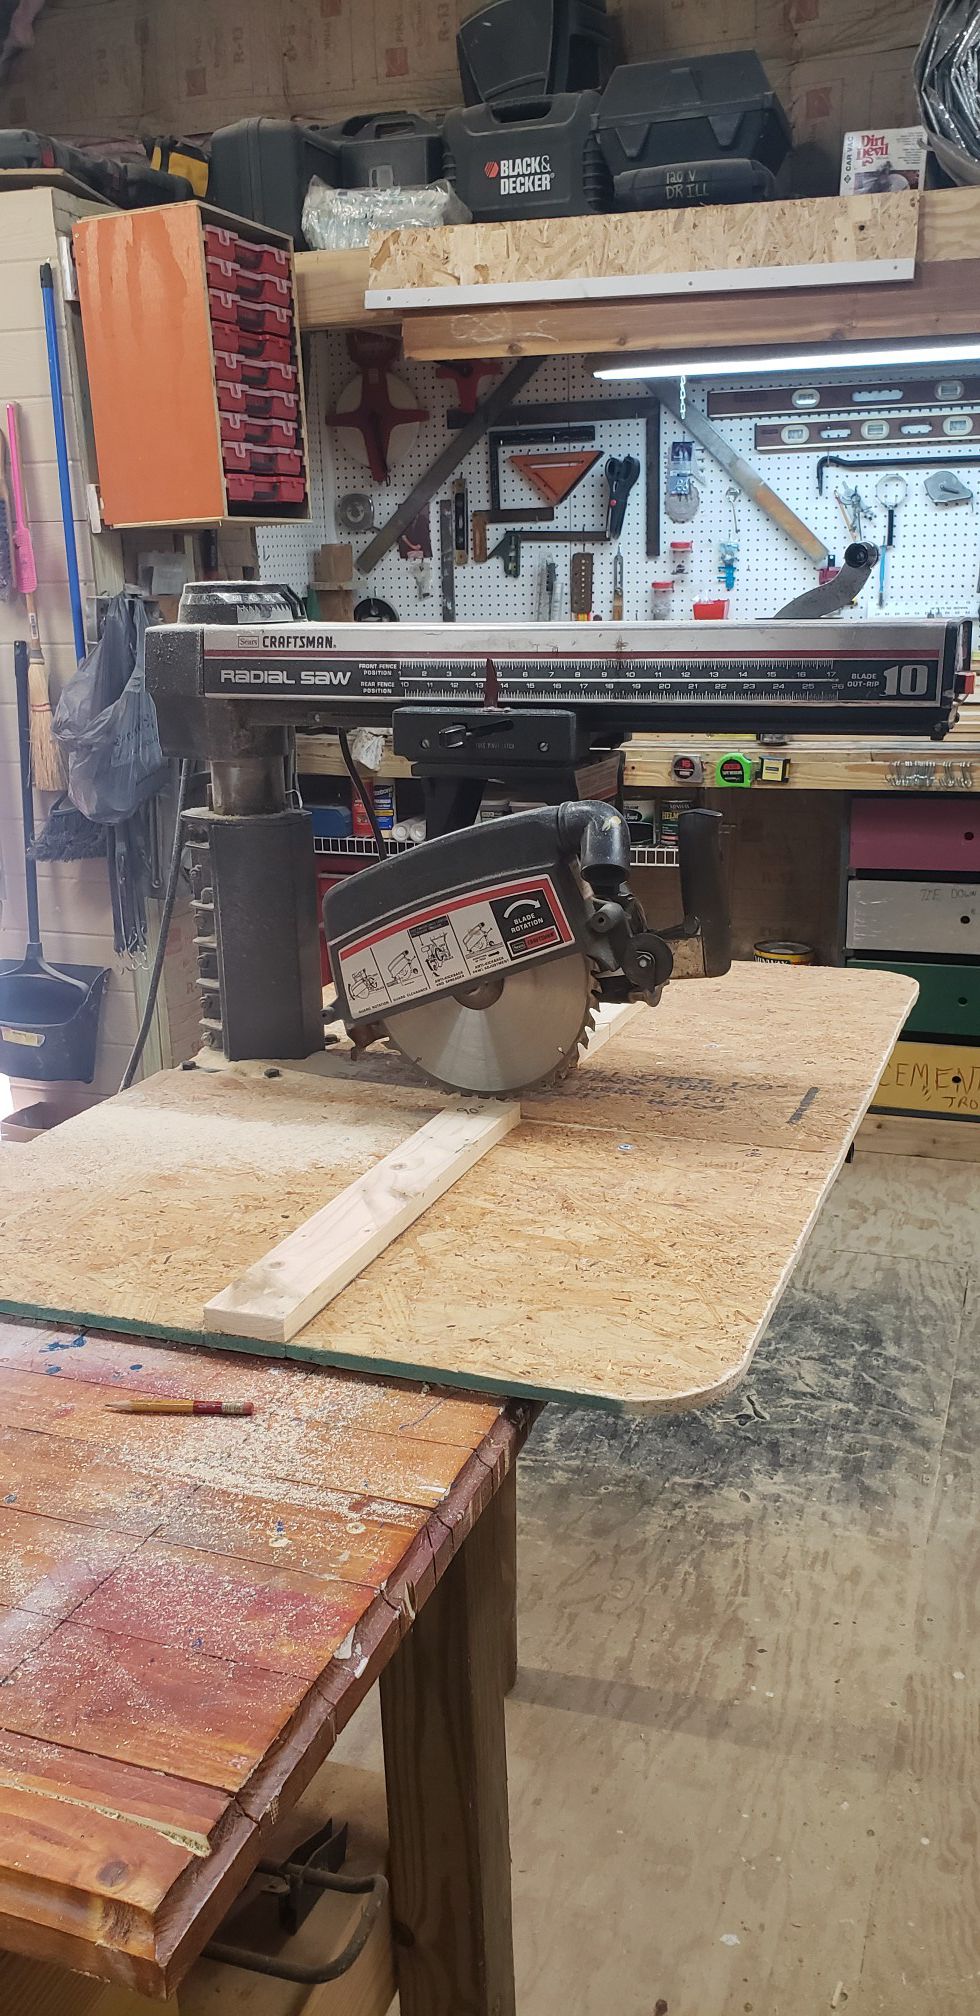 Craftsman radial are saw 10" with work table